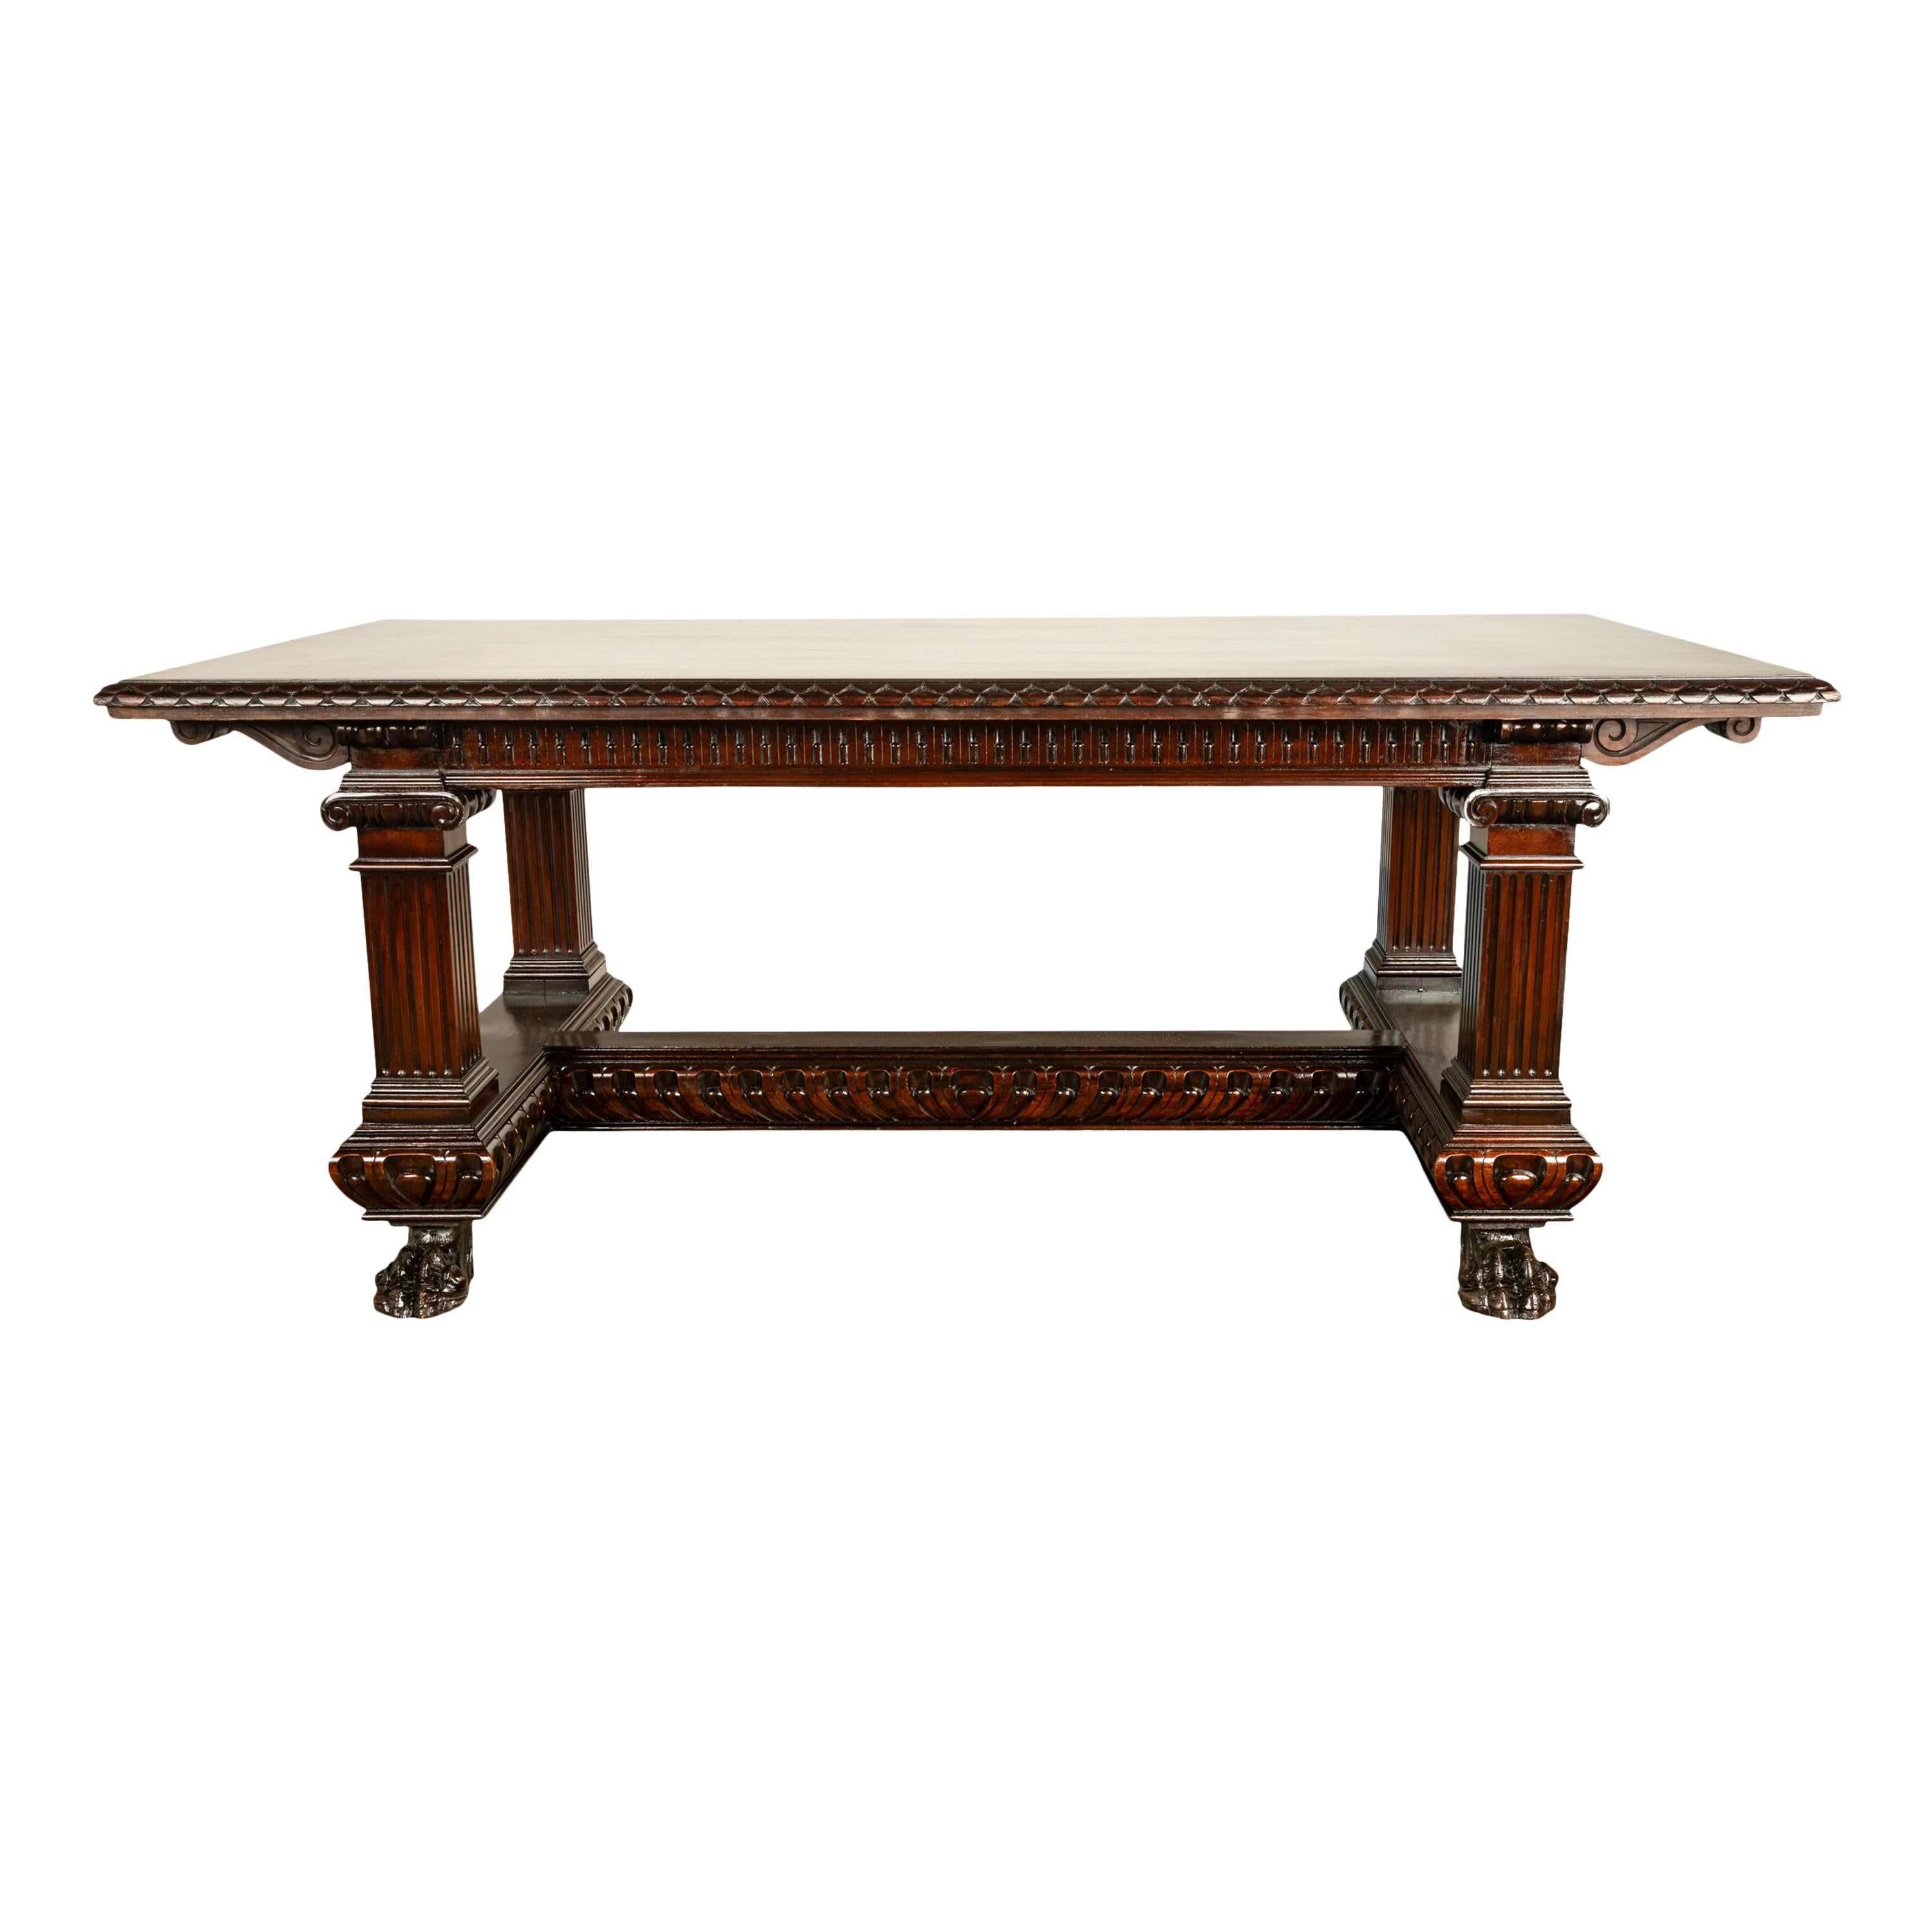 Antique Italian Carved Renaissance Revival Walnut Library Dining Table 1880 In Good Condition For Sale In Portland, OR